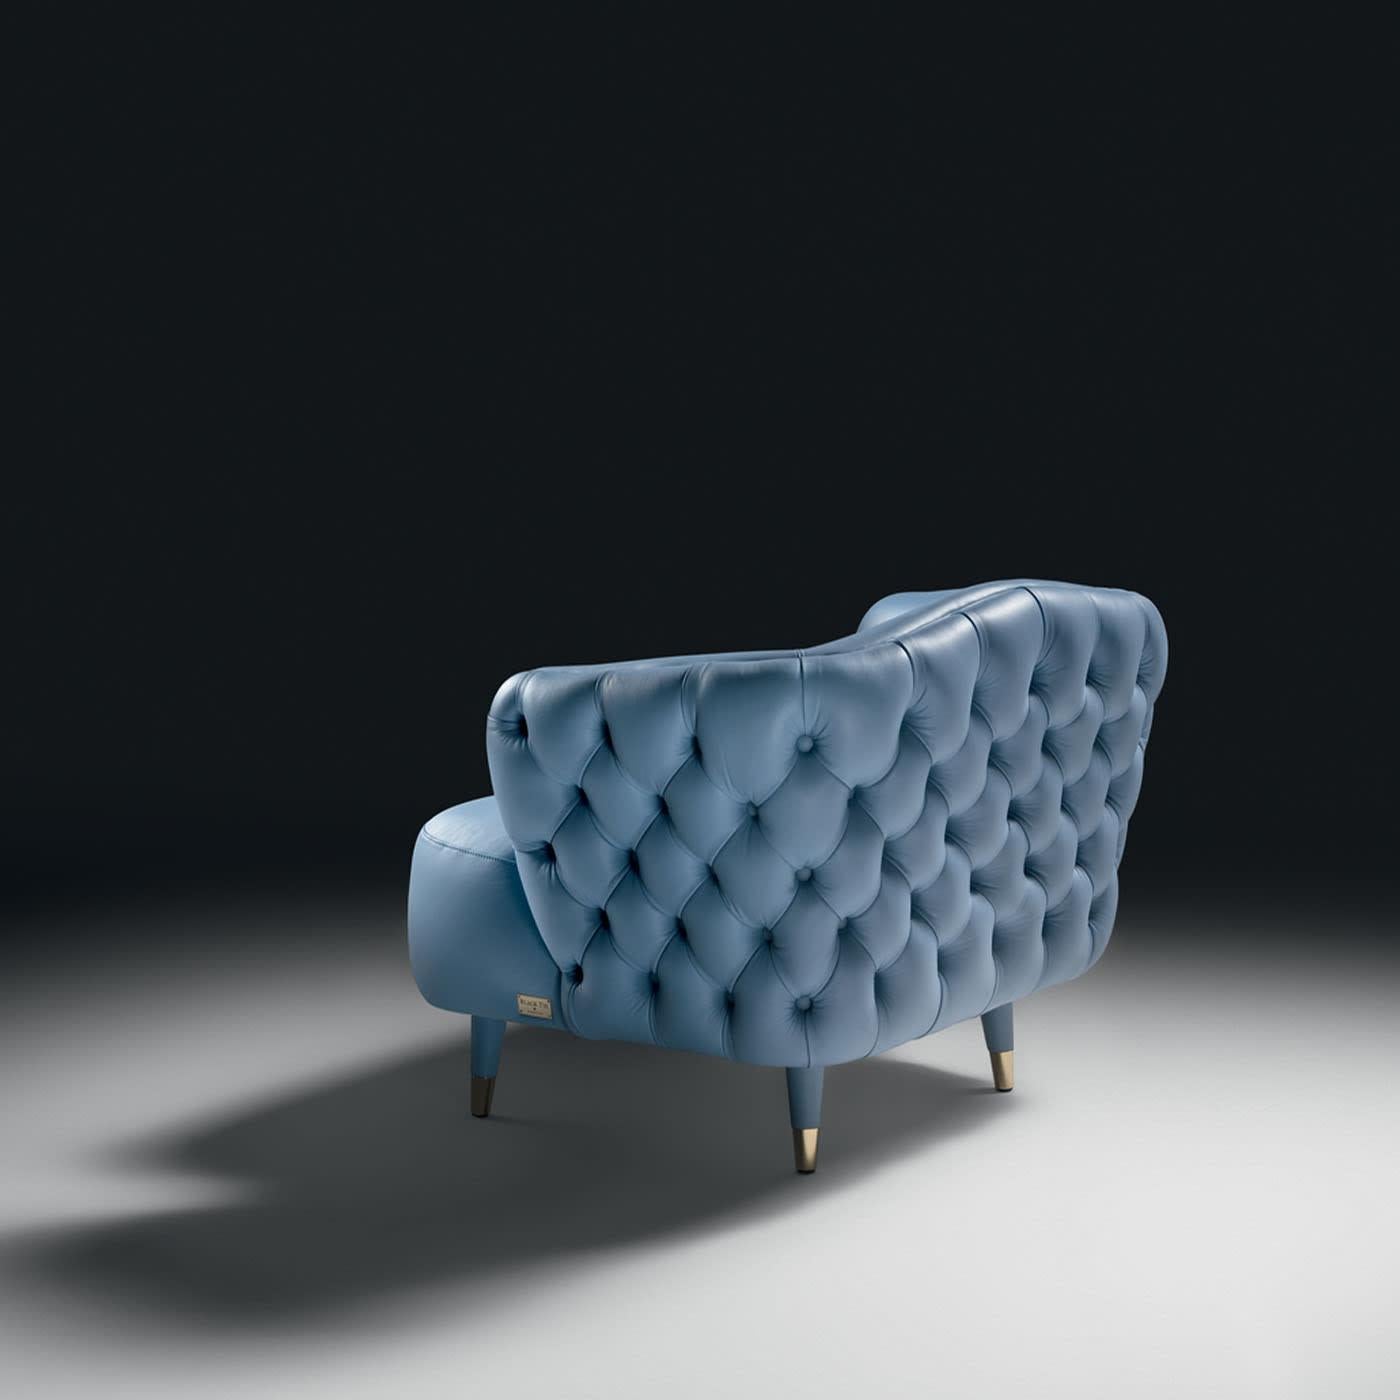 An authentic furnishing gem with a solid wooden core padded with high-density different-quote polyurethane foam, this lounge chair boasts a precious sartorial look emphasized by fine leather upholstery in a dreamy azure hue. Tapered feet with glossy